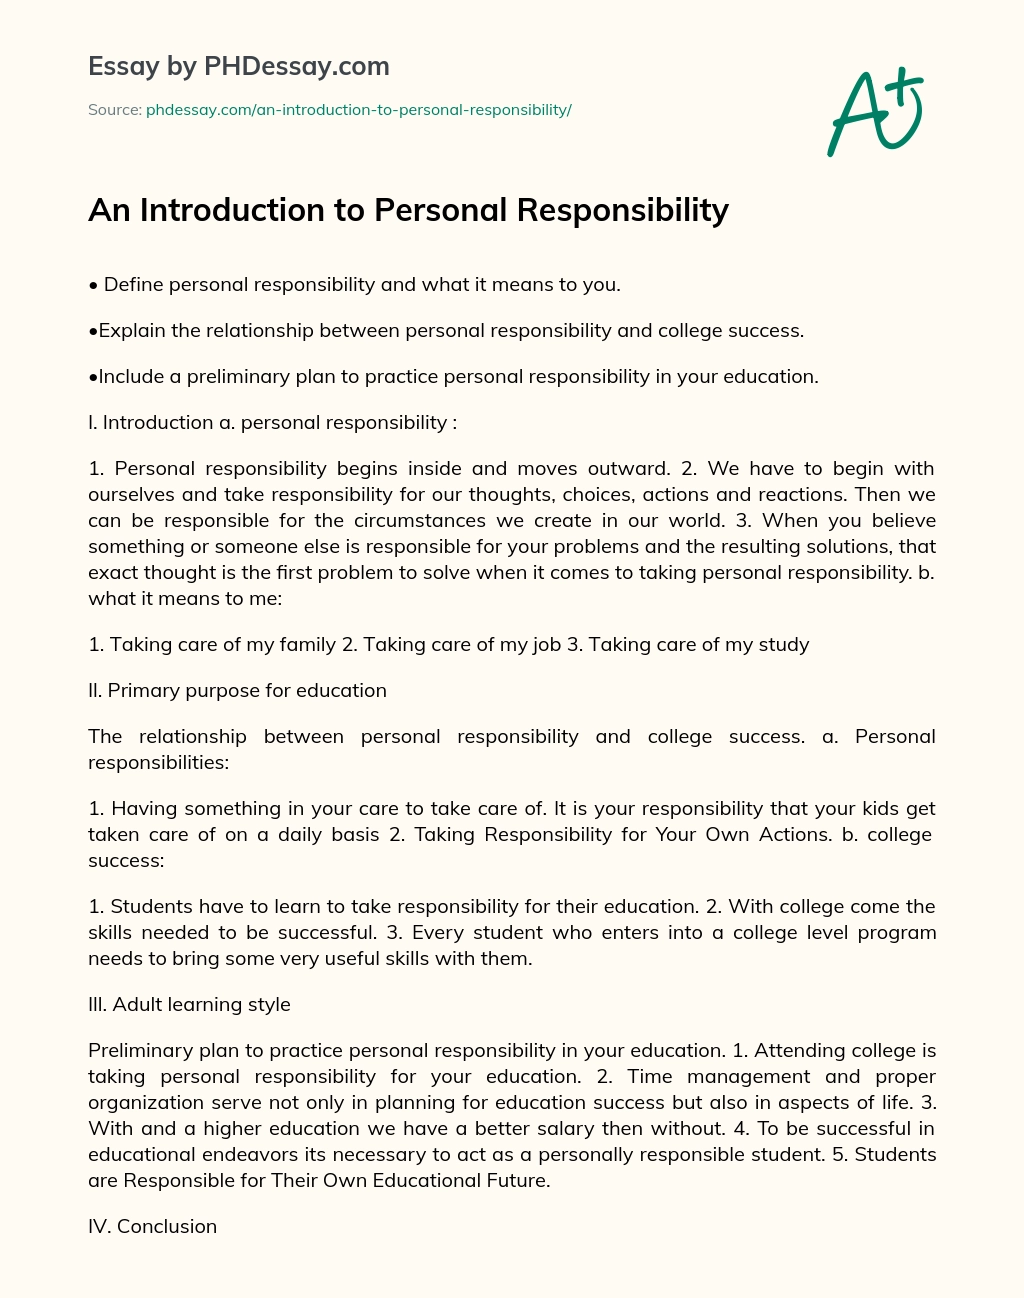 An Introduction to Personal Responsibility essay